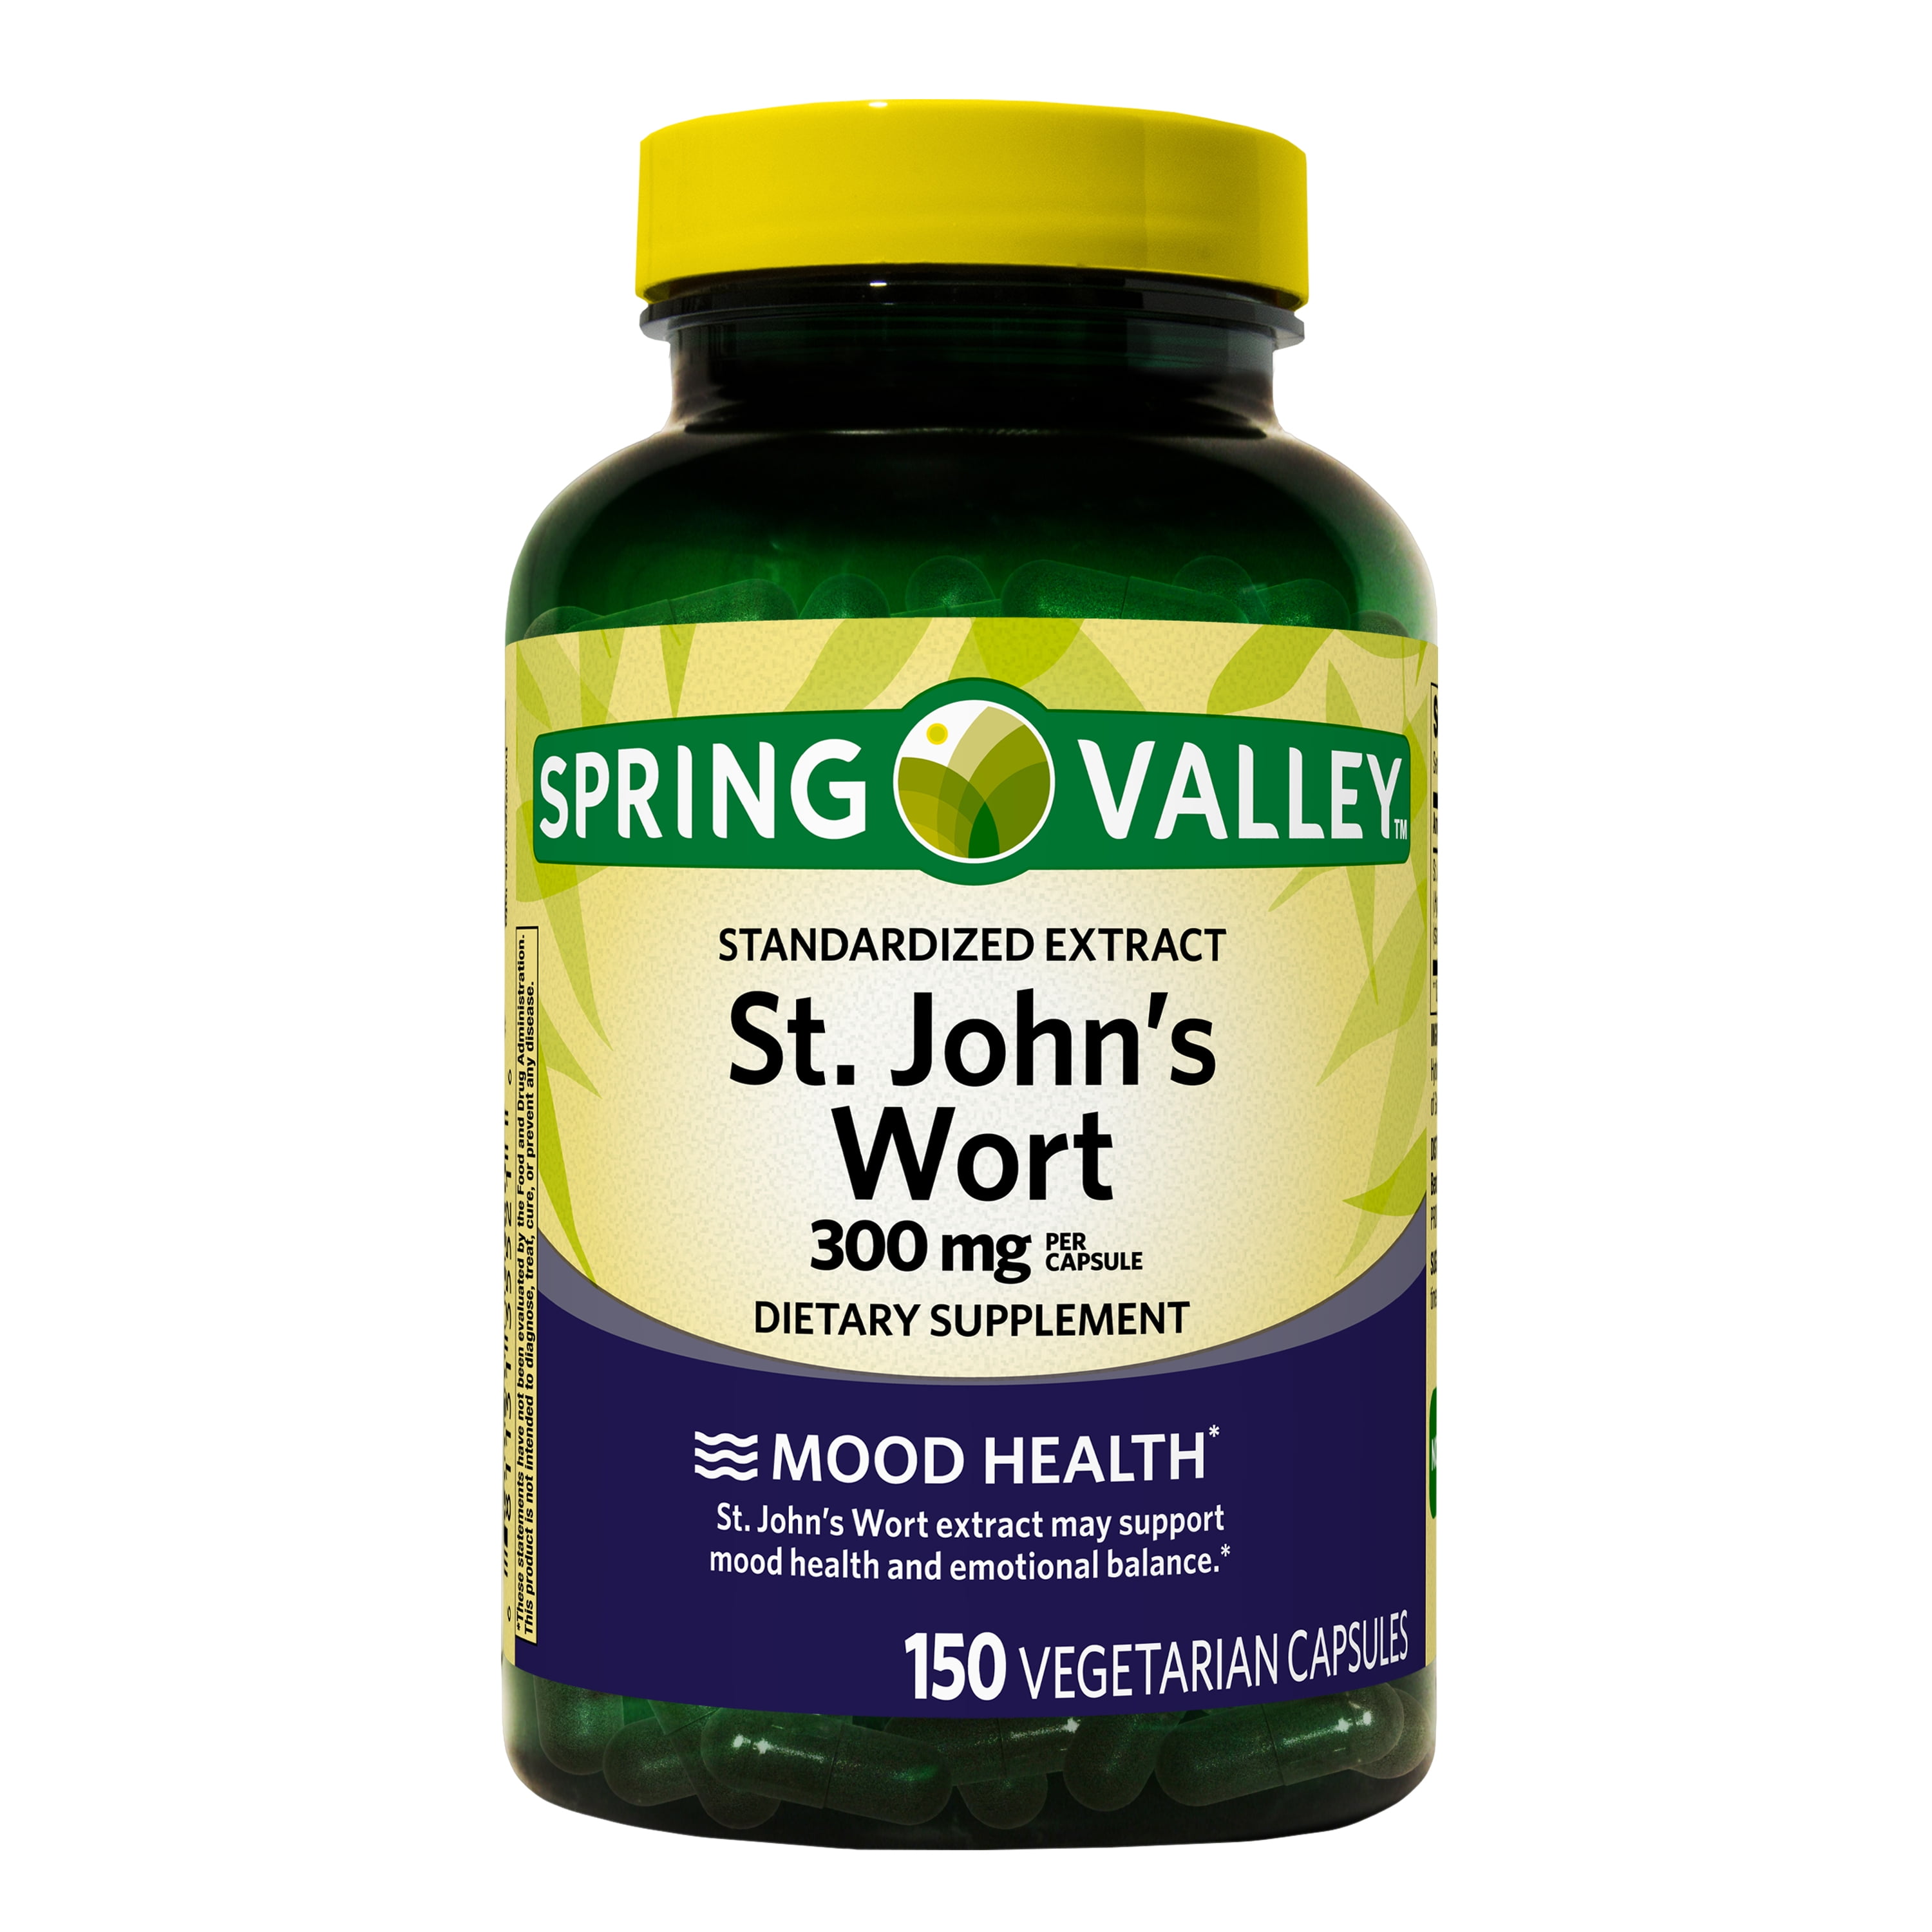 Spring Valley St. John's Wort Standardized Extract Capsules Dietary Supplement, 300 mg, 150 Count